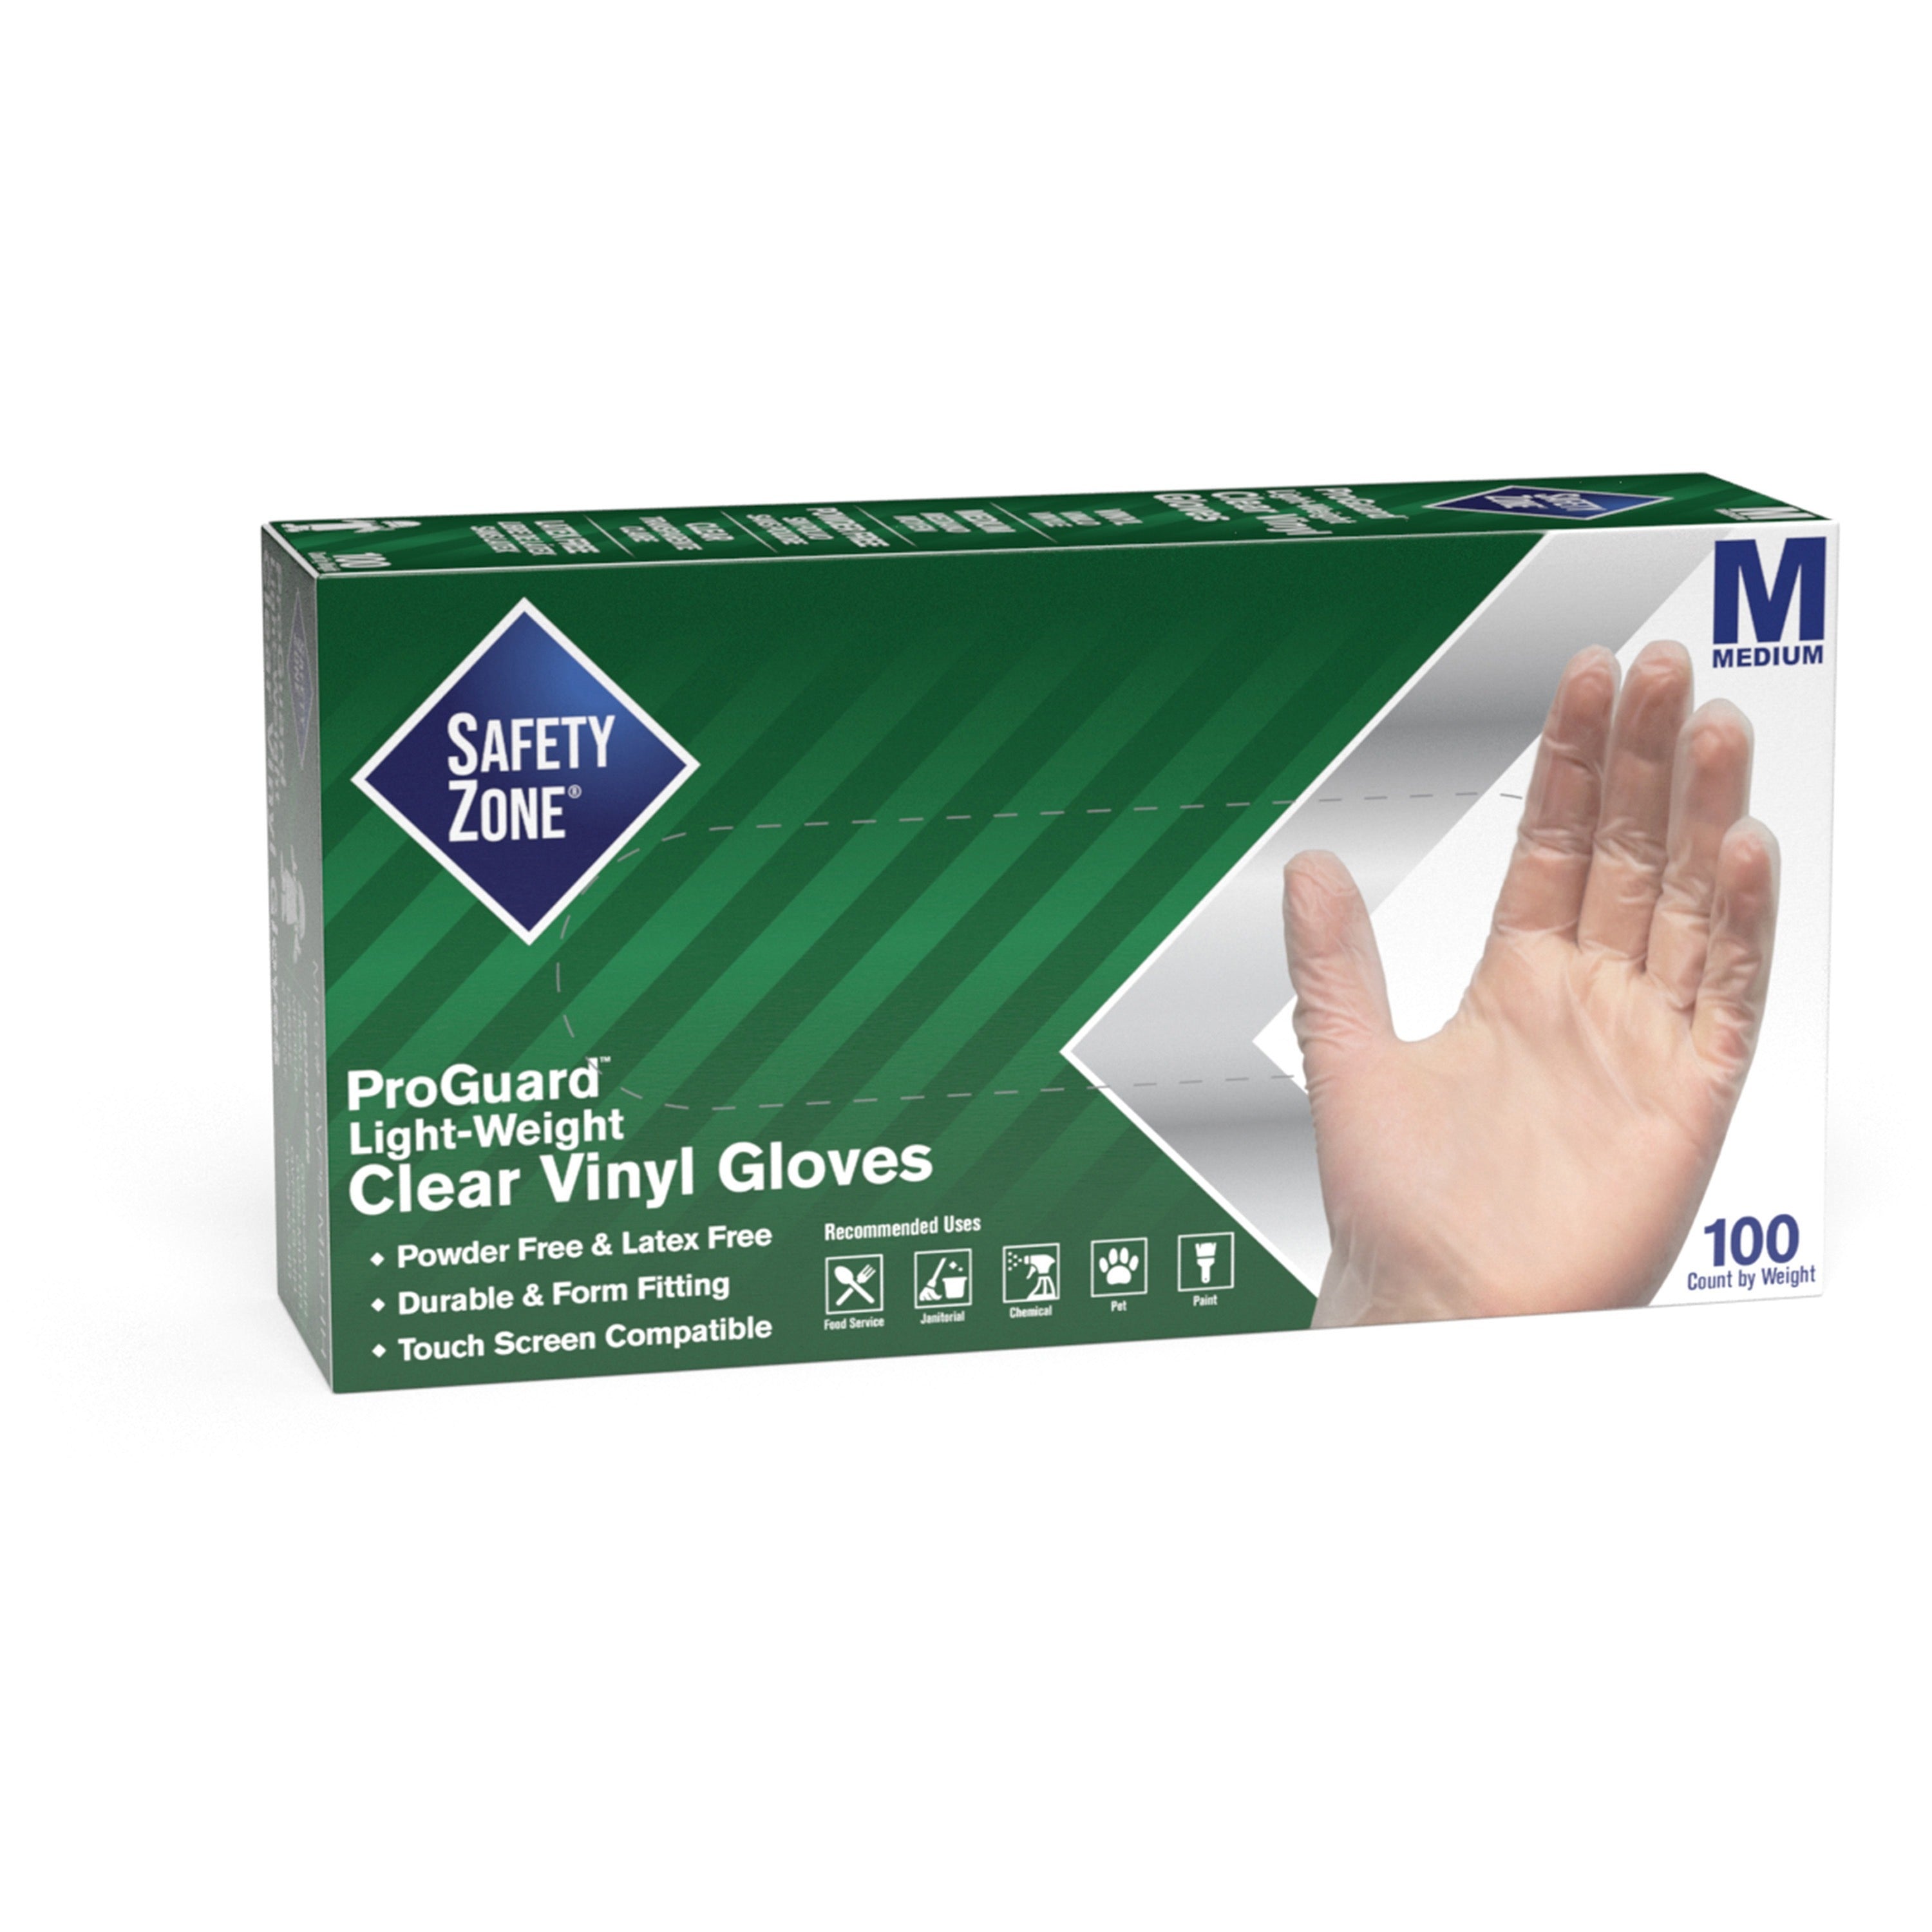 safety-zone-powder-free-clear-vinyl-gloves-medium-size-clear-latex-free-dehp-free-dinp-free-pfas-free-for-food-preparation-cleaning-1000-carton-925-glove-length_szngvp9mdhhct - 1